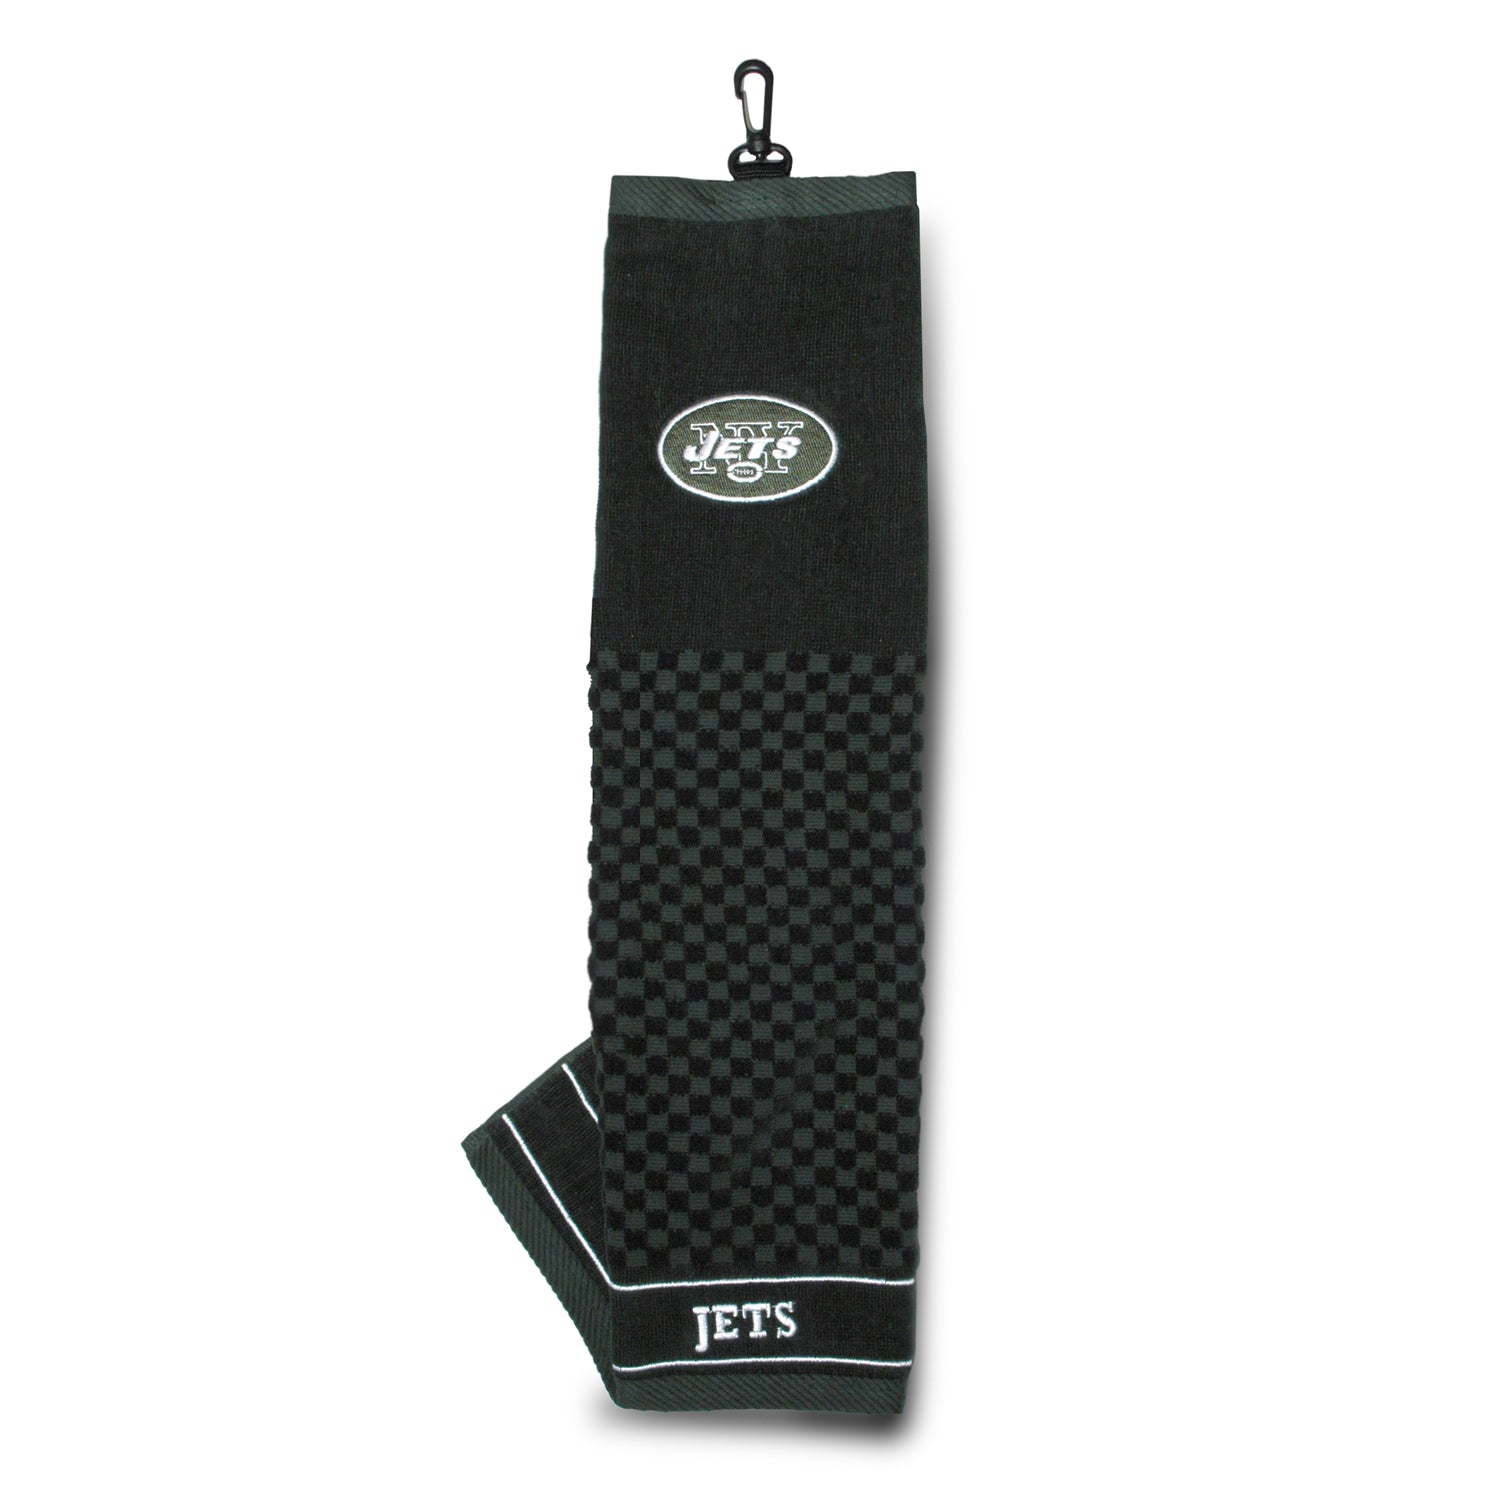 New York Jets Embroidered Towel